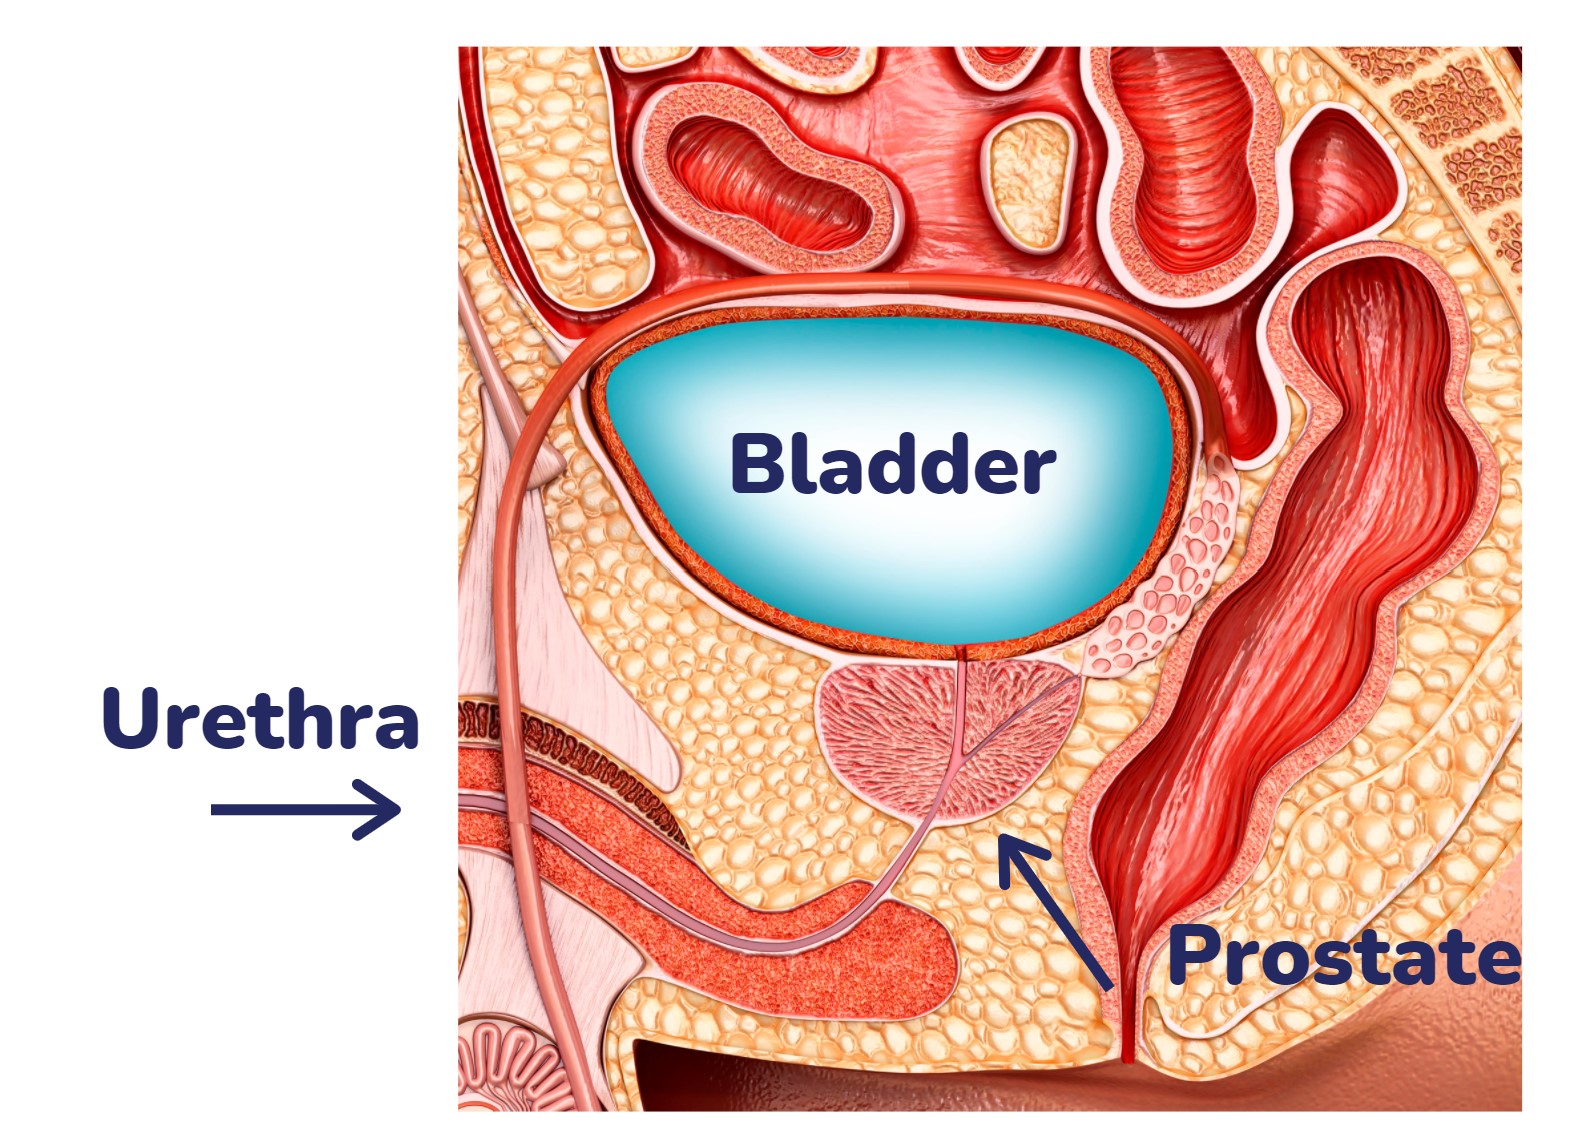 Diagram of a prostate